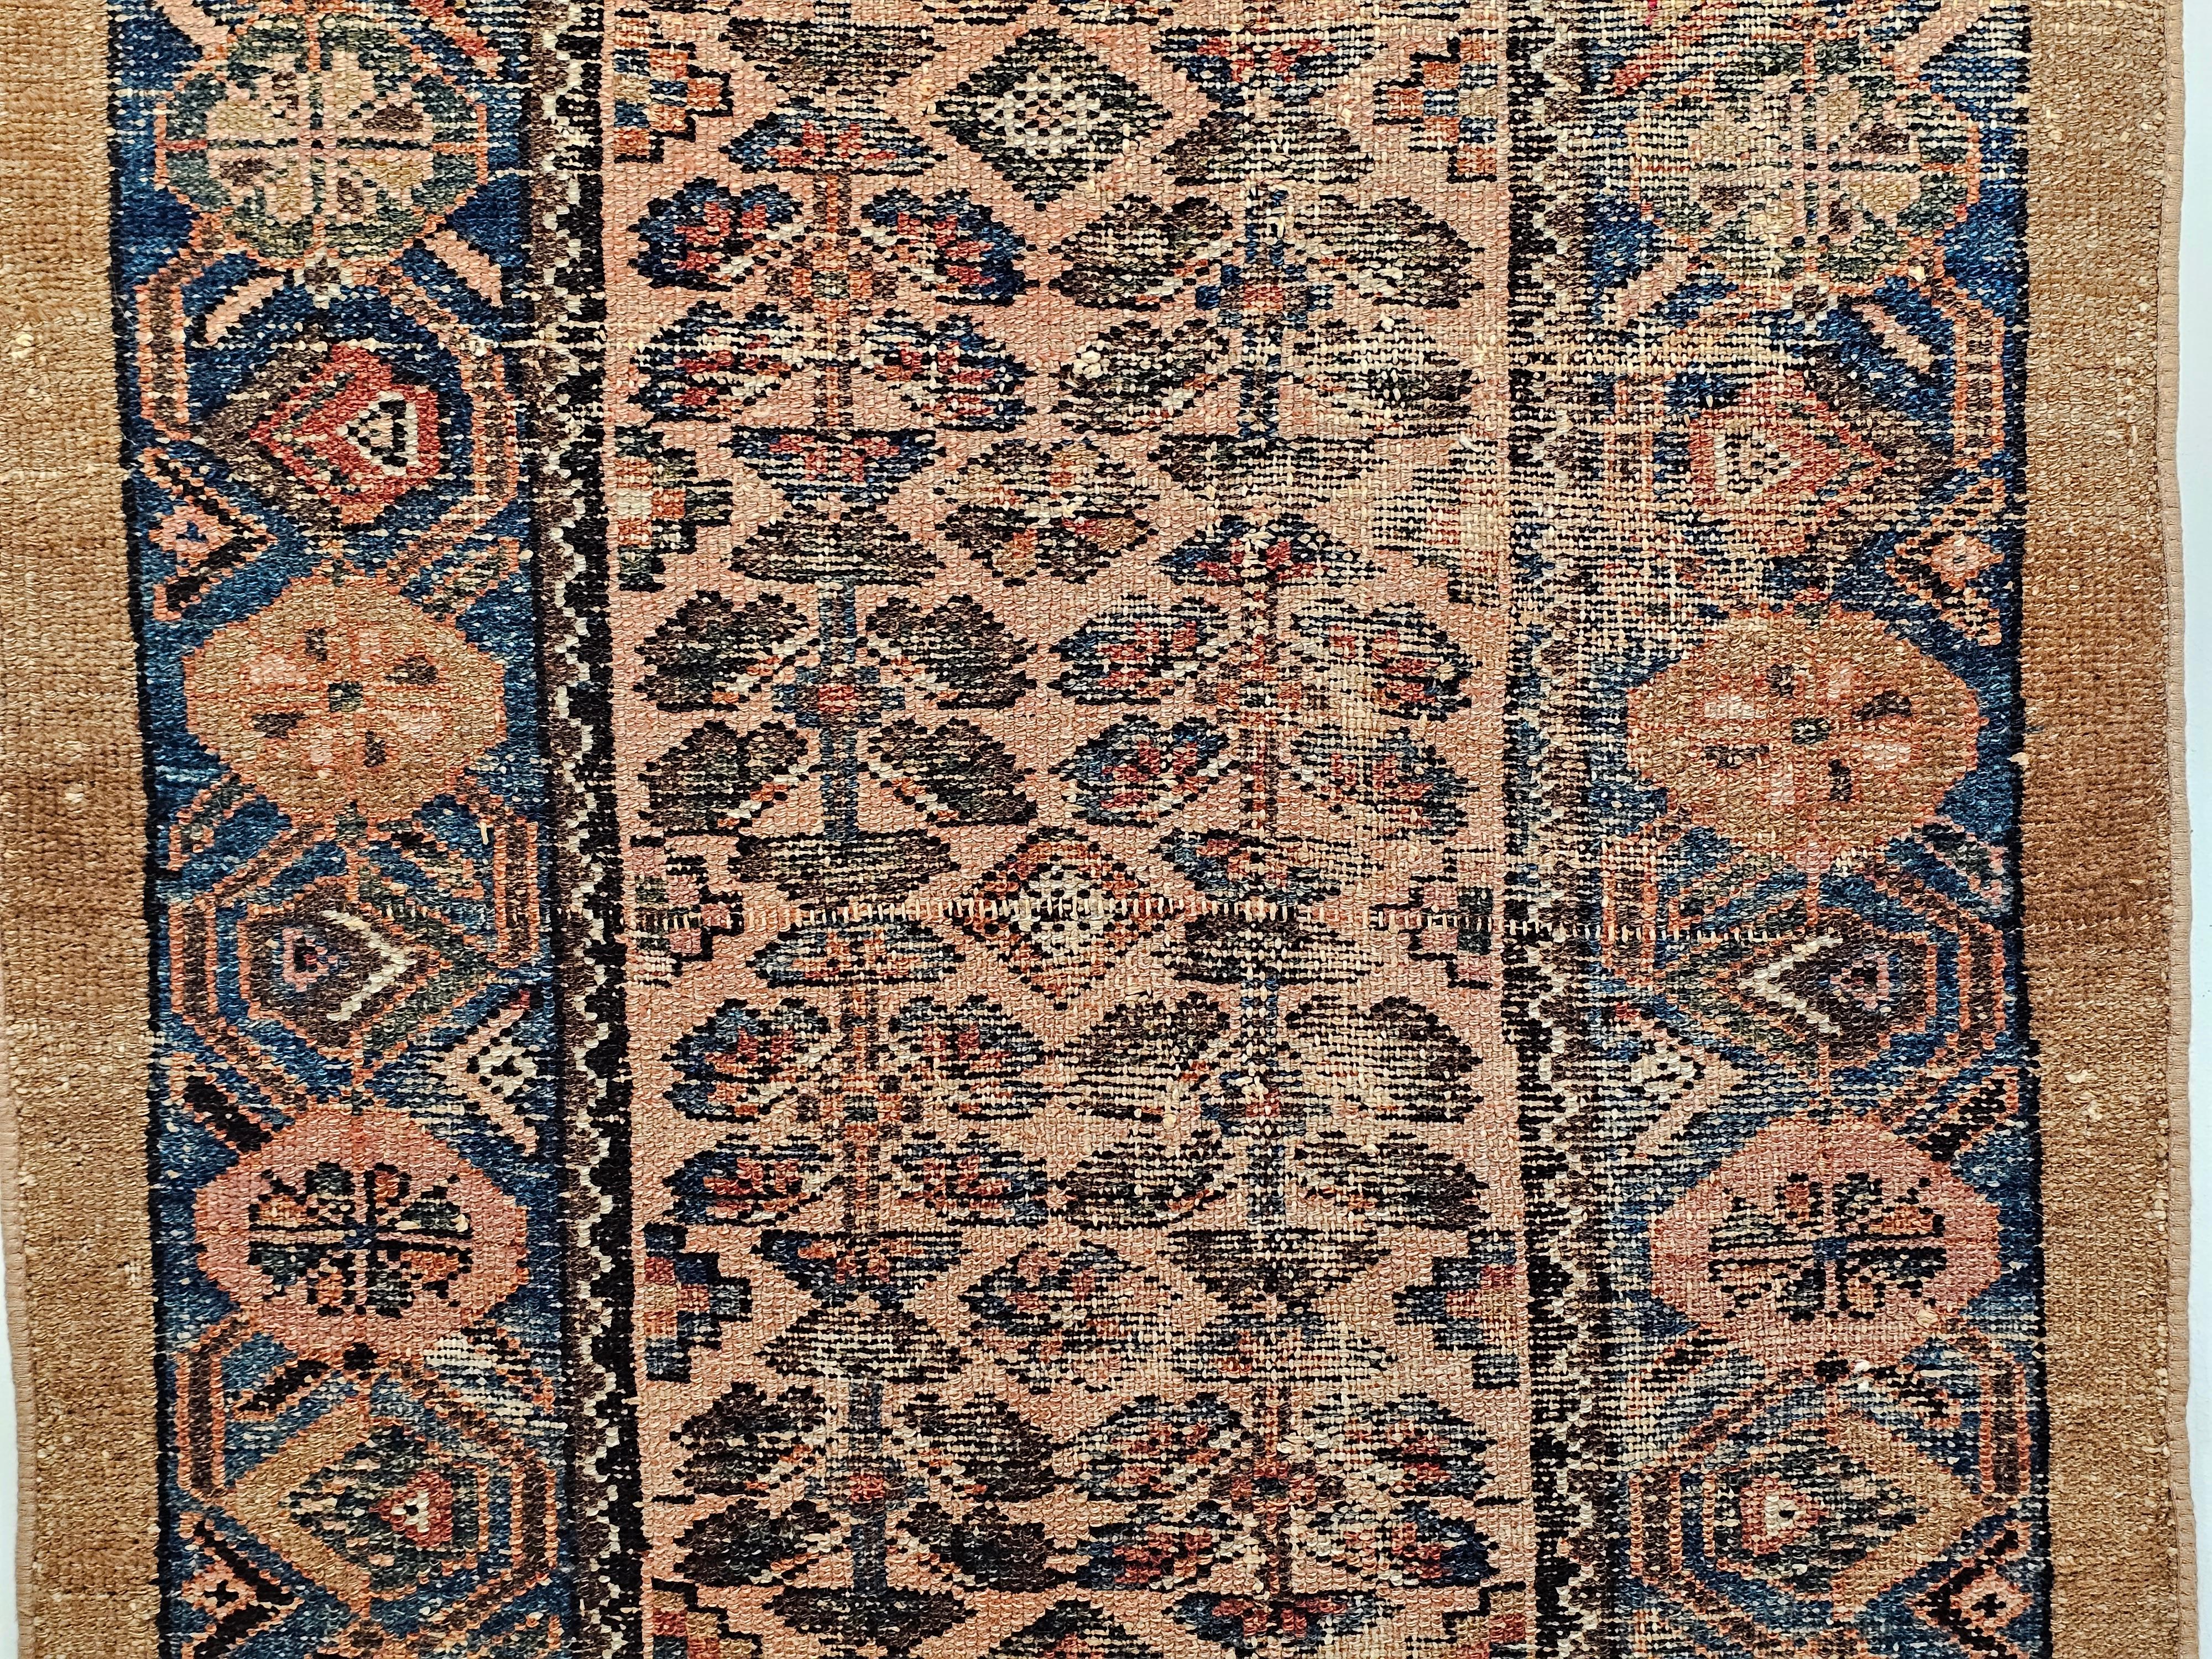 Vegetable Dyed Vintage Persian Camelhair Malayer Area Rug in Allover Pattern with French Blue For Sale